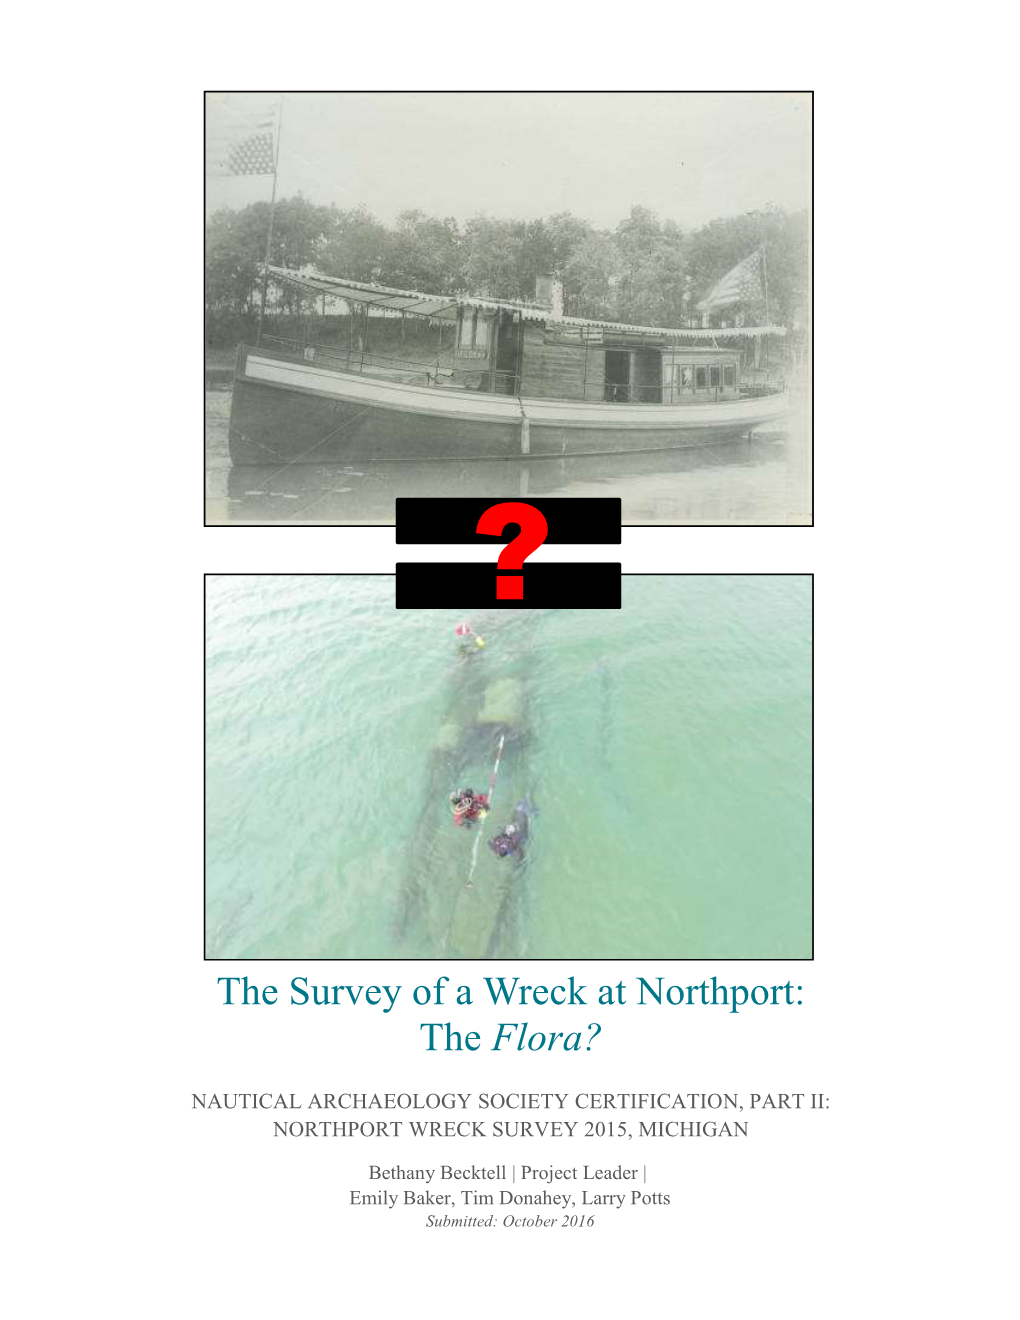 The Survey of the Wreck at Northport: the Flora?